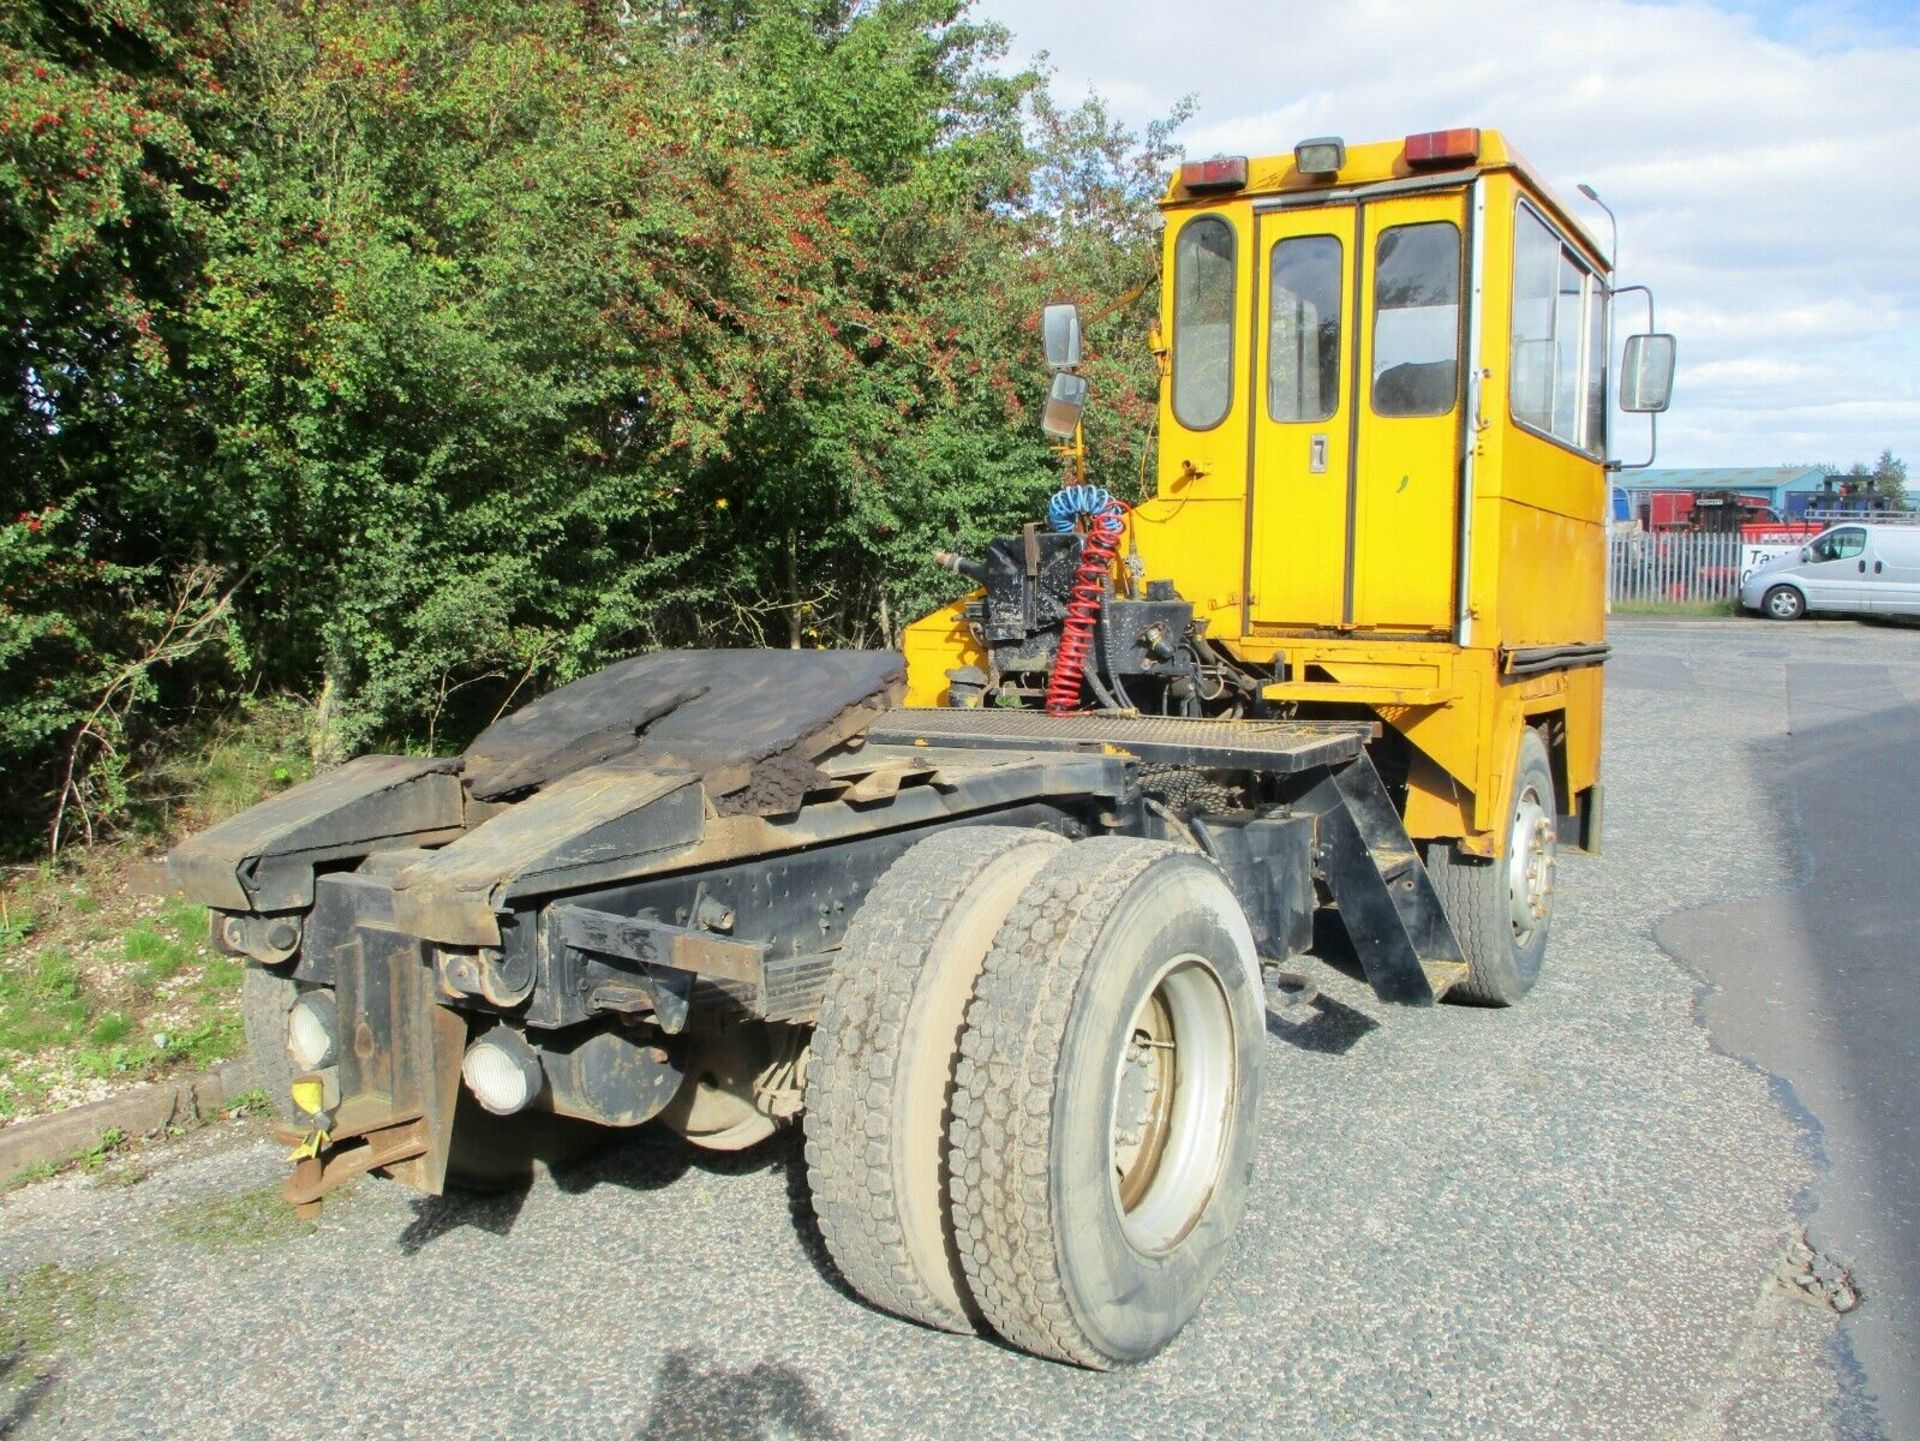 Reliance Dock spotter shunter tow tug tractor unit - Image 10 of 10